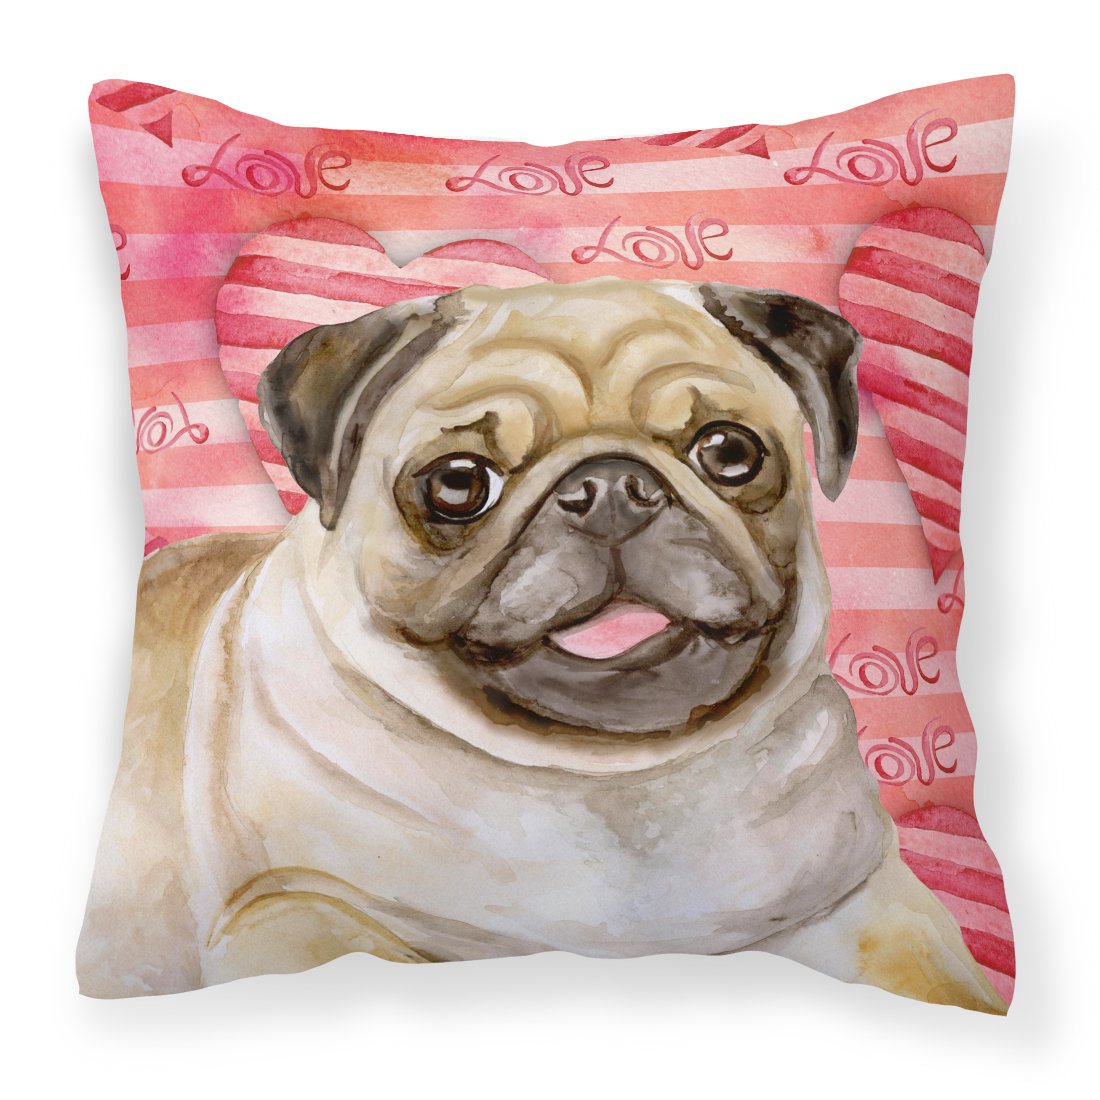 Fawn Pug Love Fabric Decorative Pillow BB9805PW1818 by Caroline's Treasures